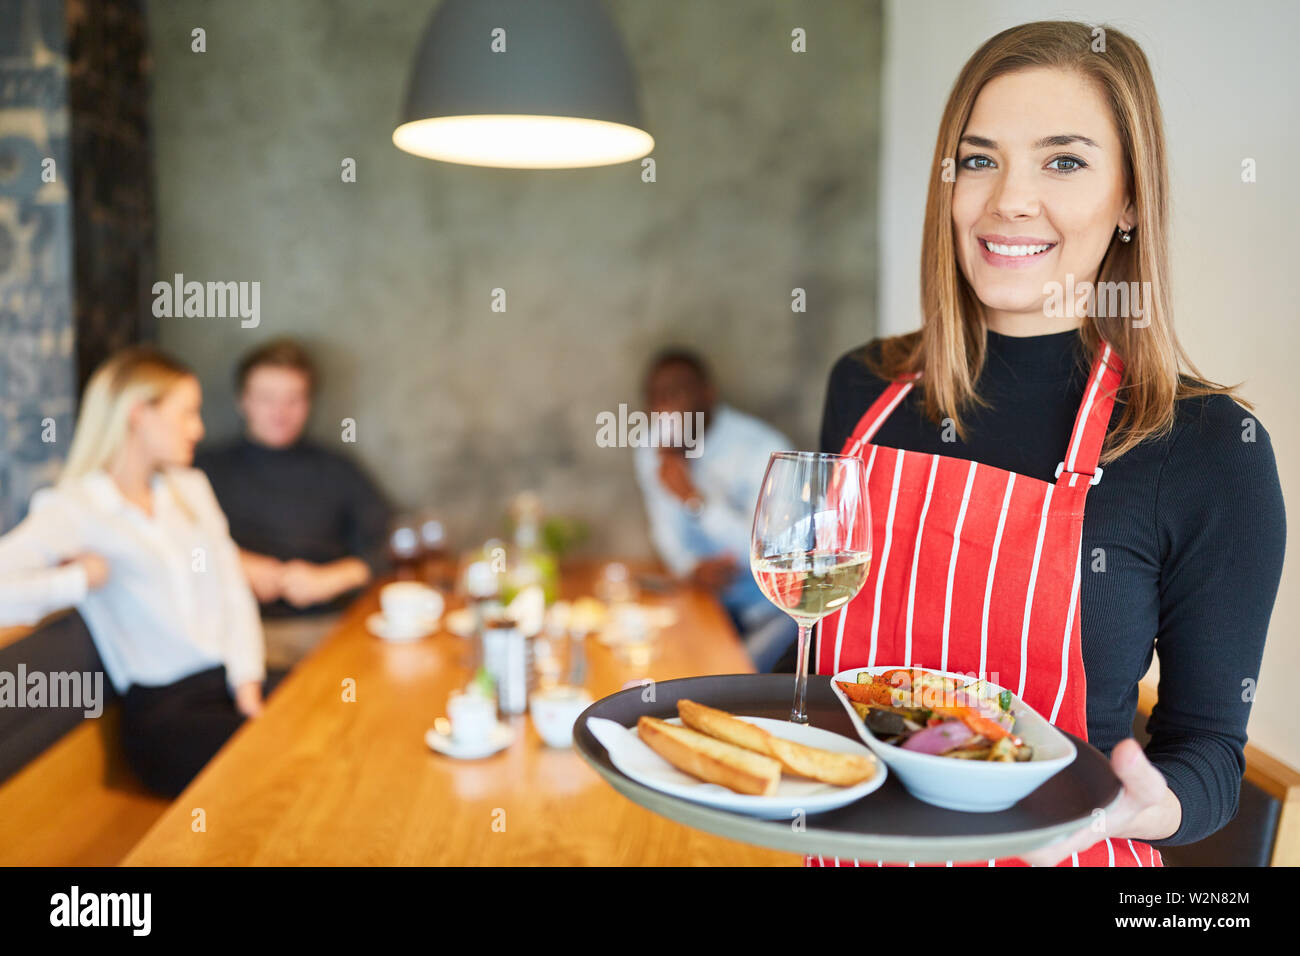 Friendly young waitress with appetizers makes training in the restaurant Stock Photo